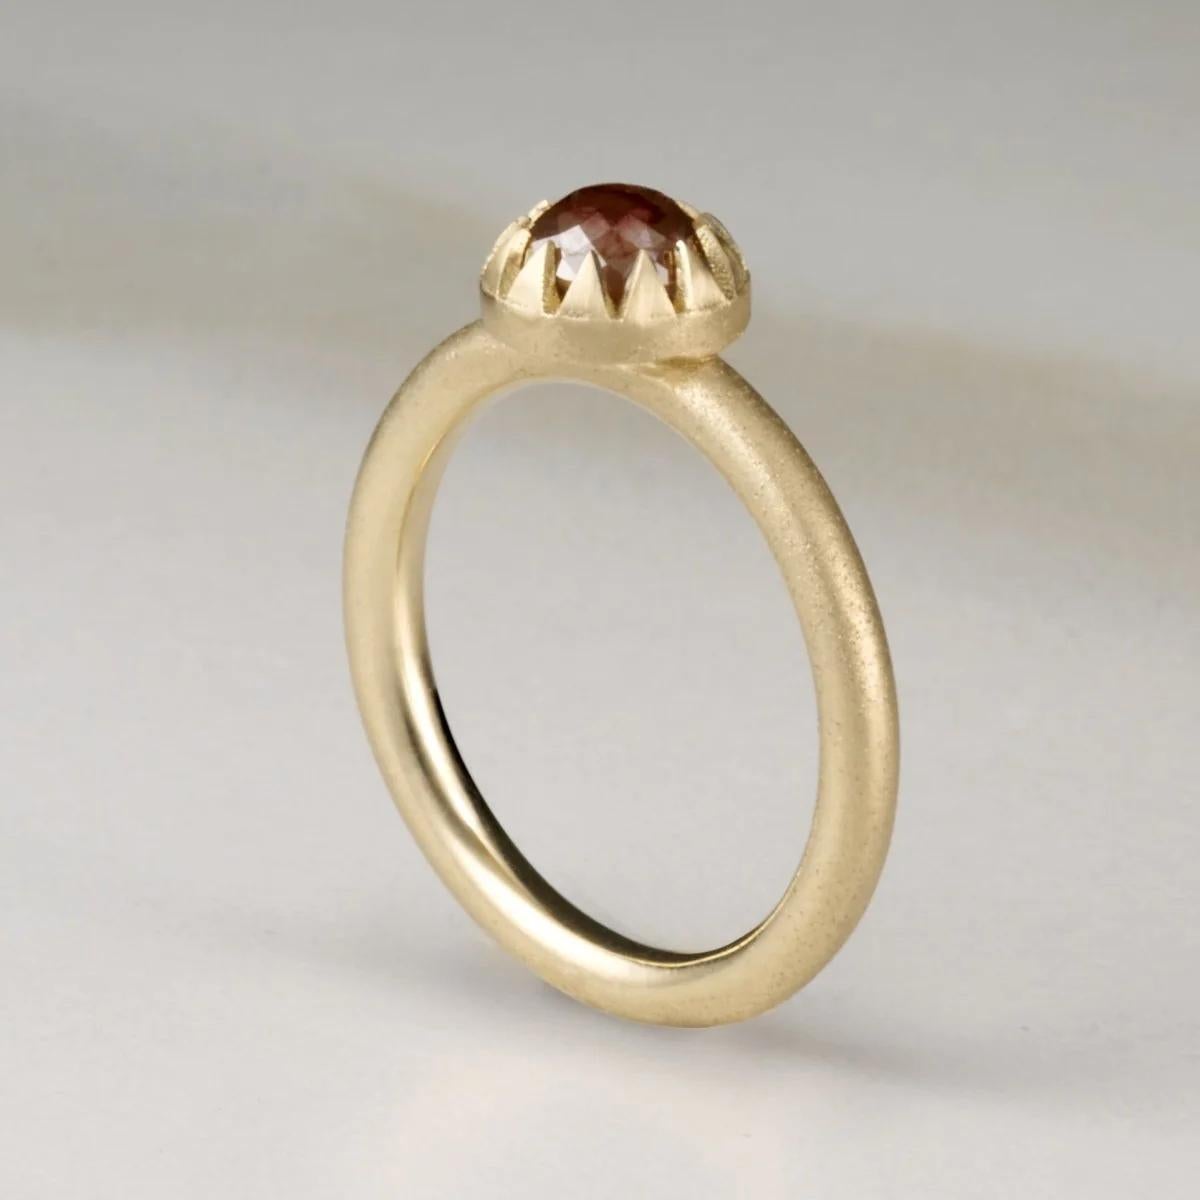 For Sale:  EMBLM Peristome Ring – 14k Gold, 1ct Brown Rustic Rose Cut Diamond 3